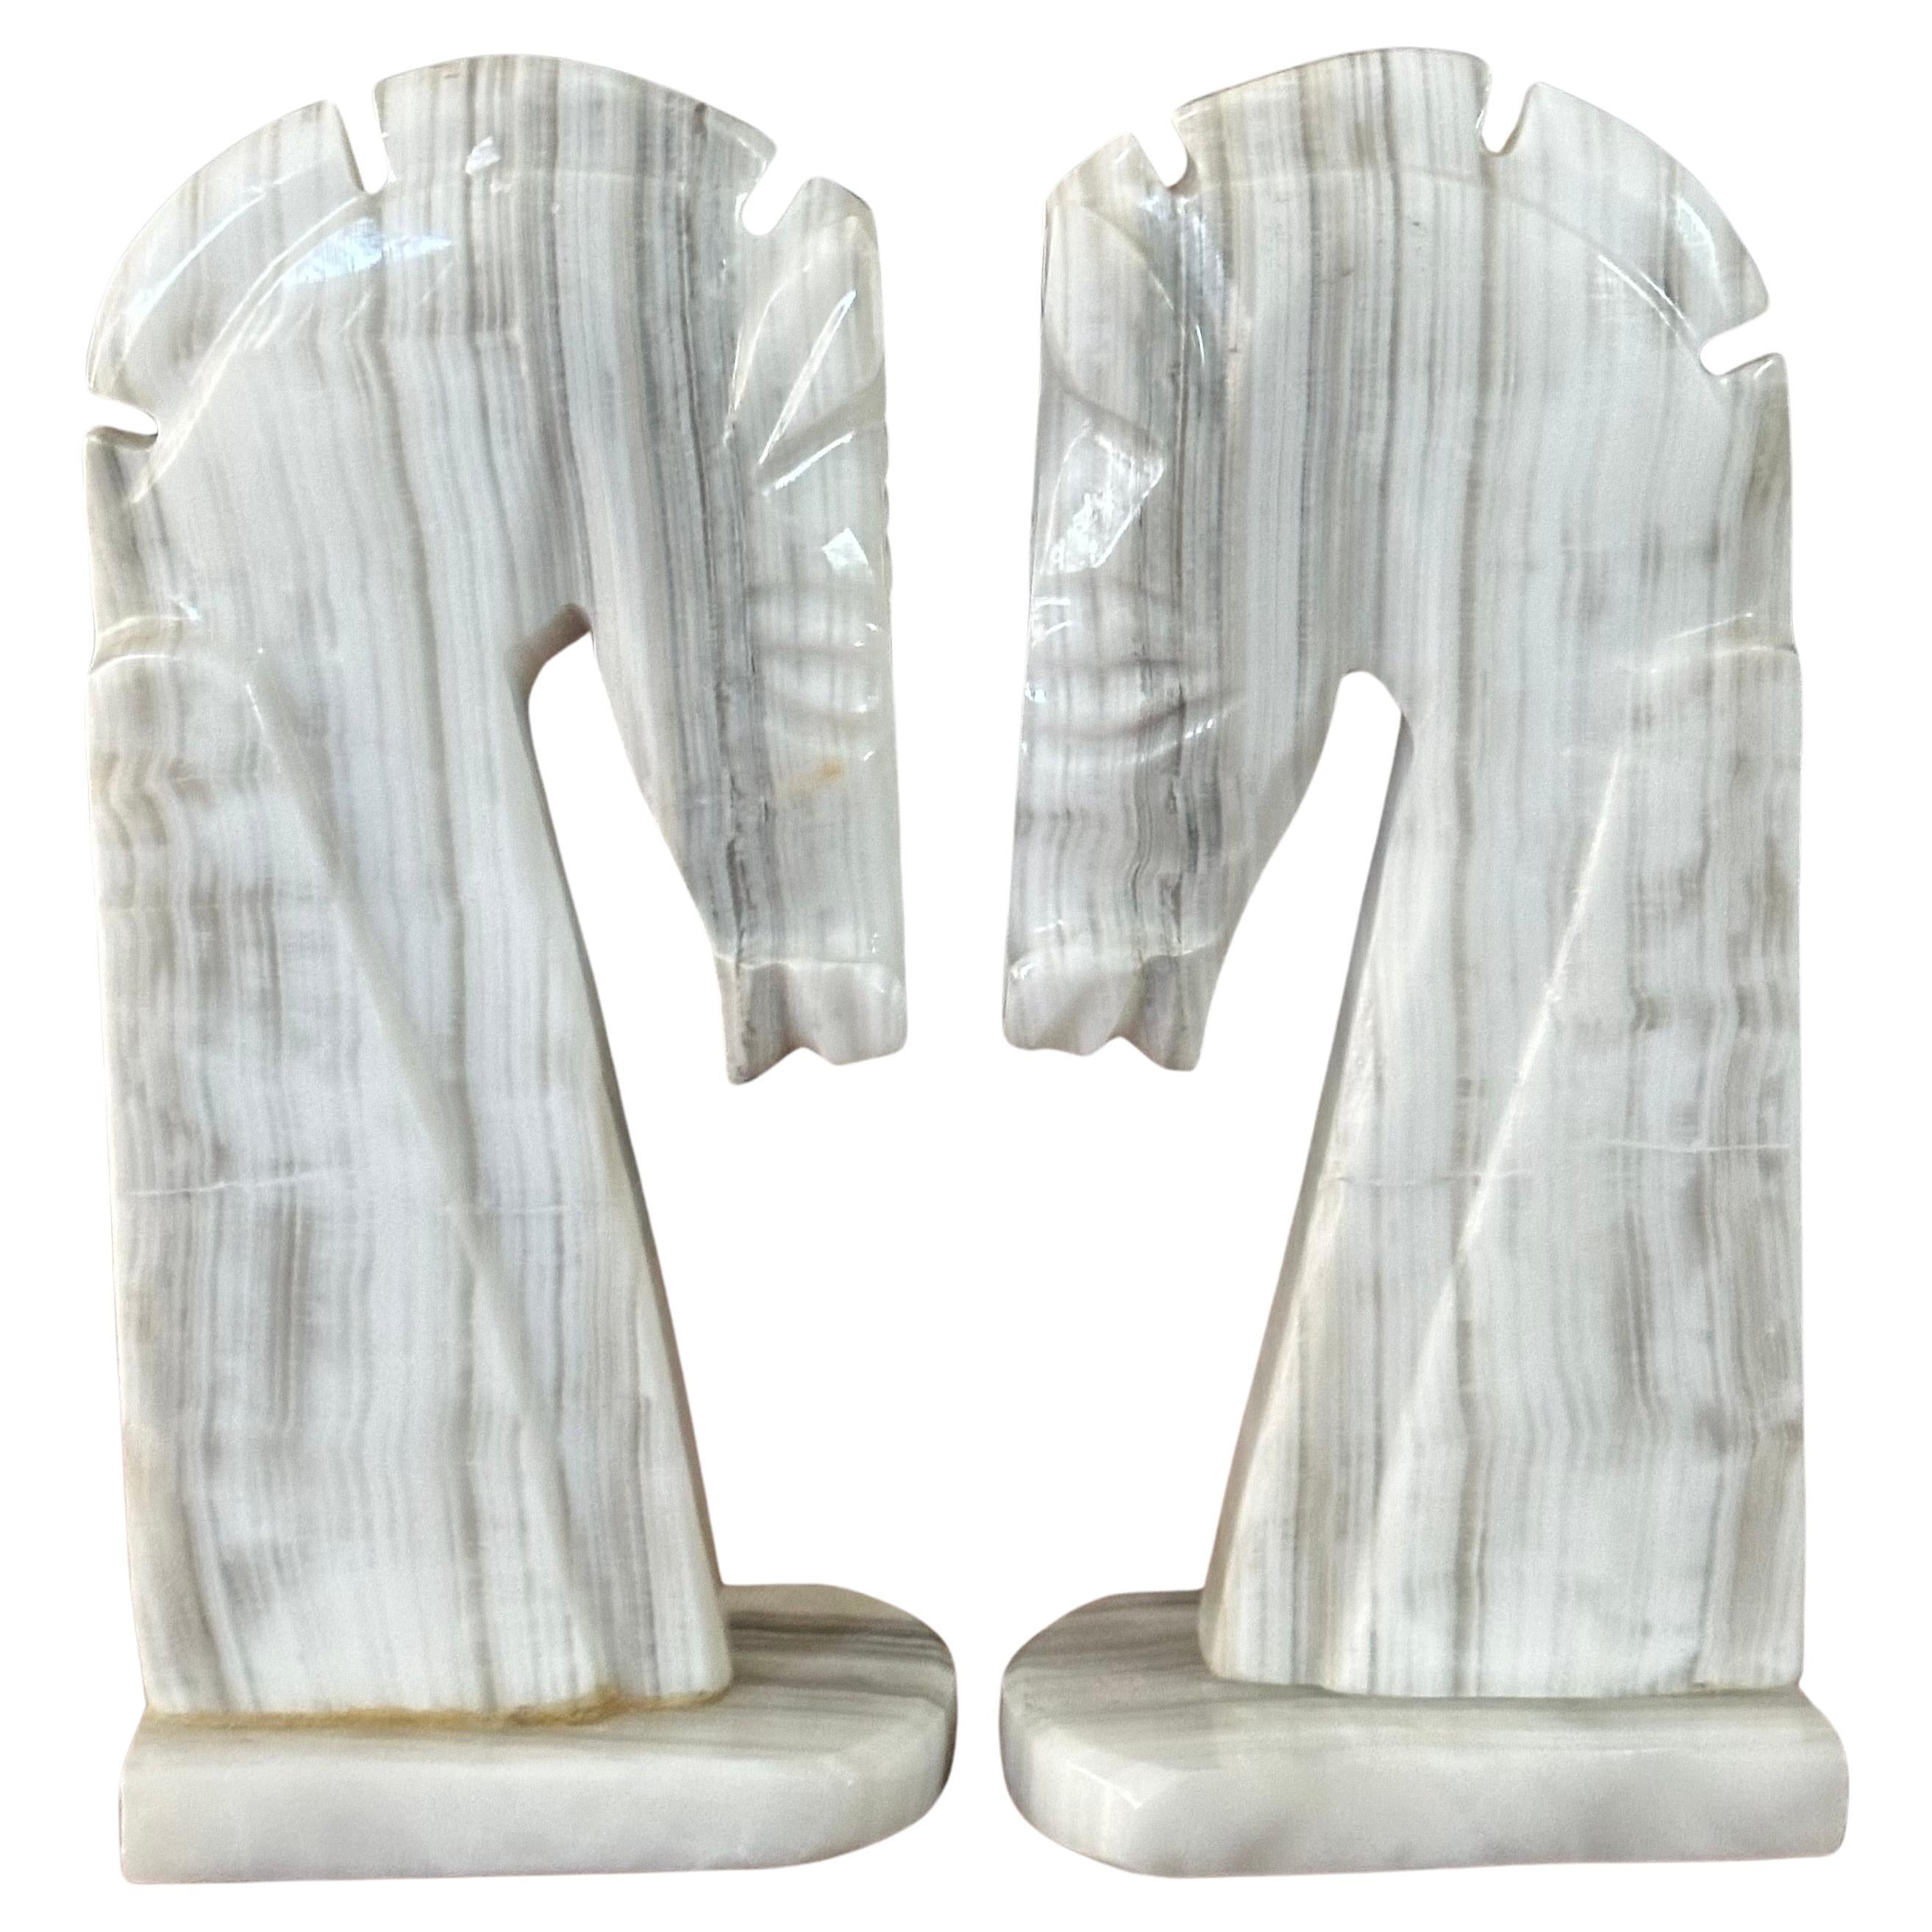 Pair of Mid-Century White Marble Horse Head Bookends